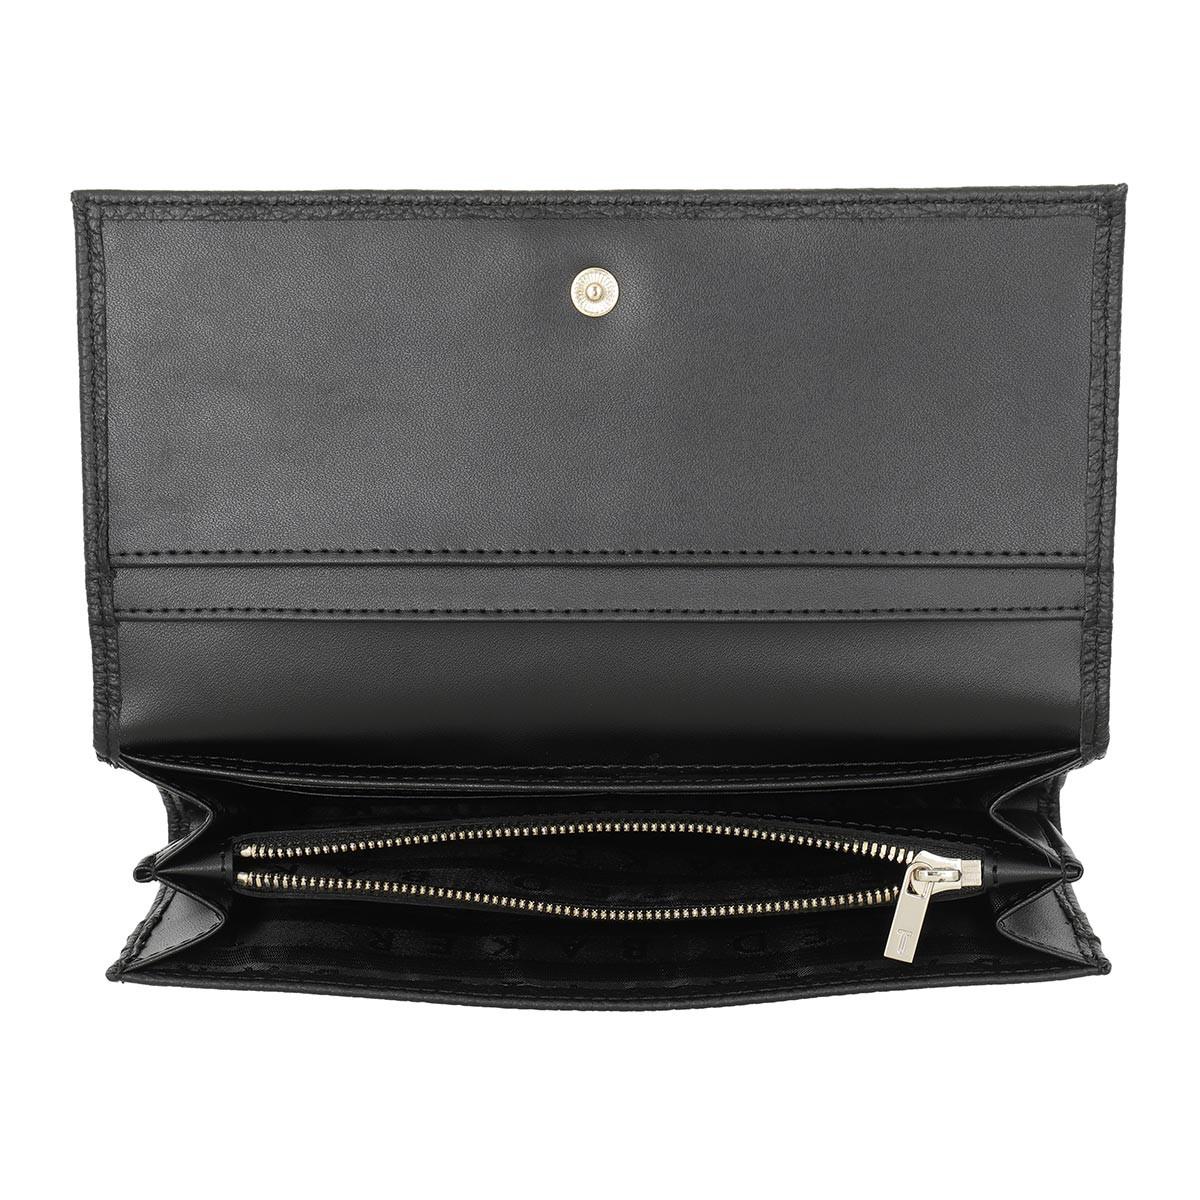 Ted Baker Statement Letters Leather Matinee Purse in Black - Lyst